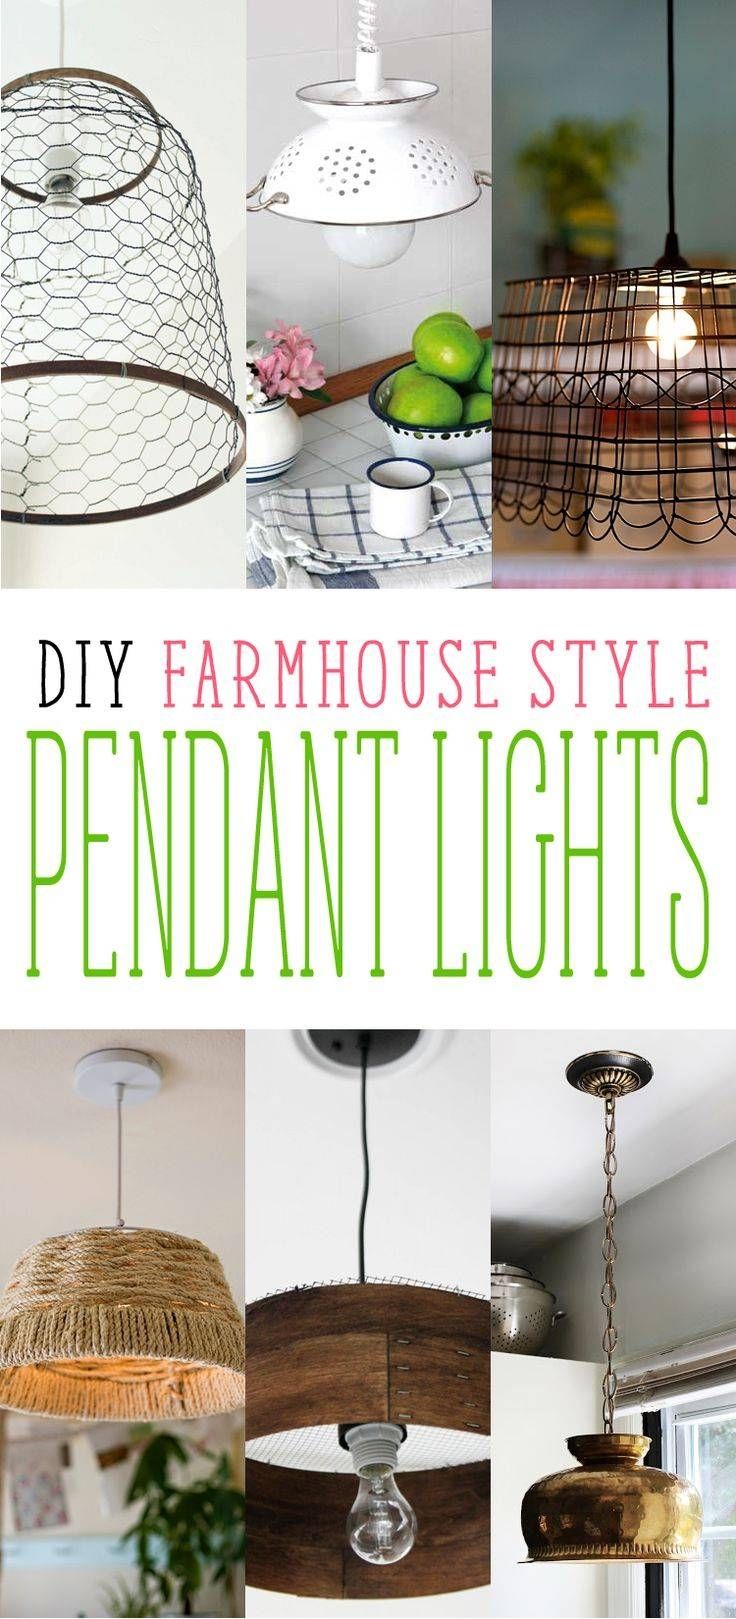 Best 25+ Diy Pendant Light Ideas Only On Pinterest | Hanging Throughout Diy Pendant Lights (View 11 of 15)